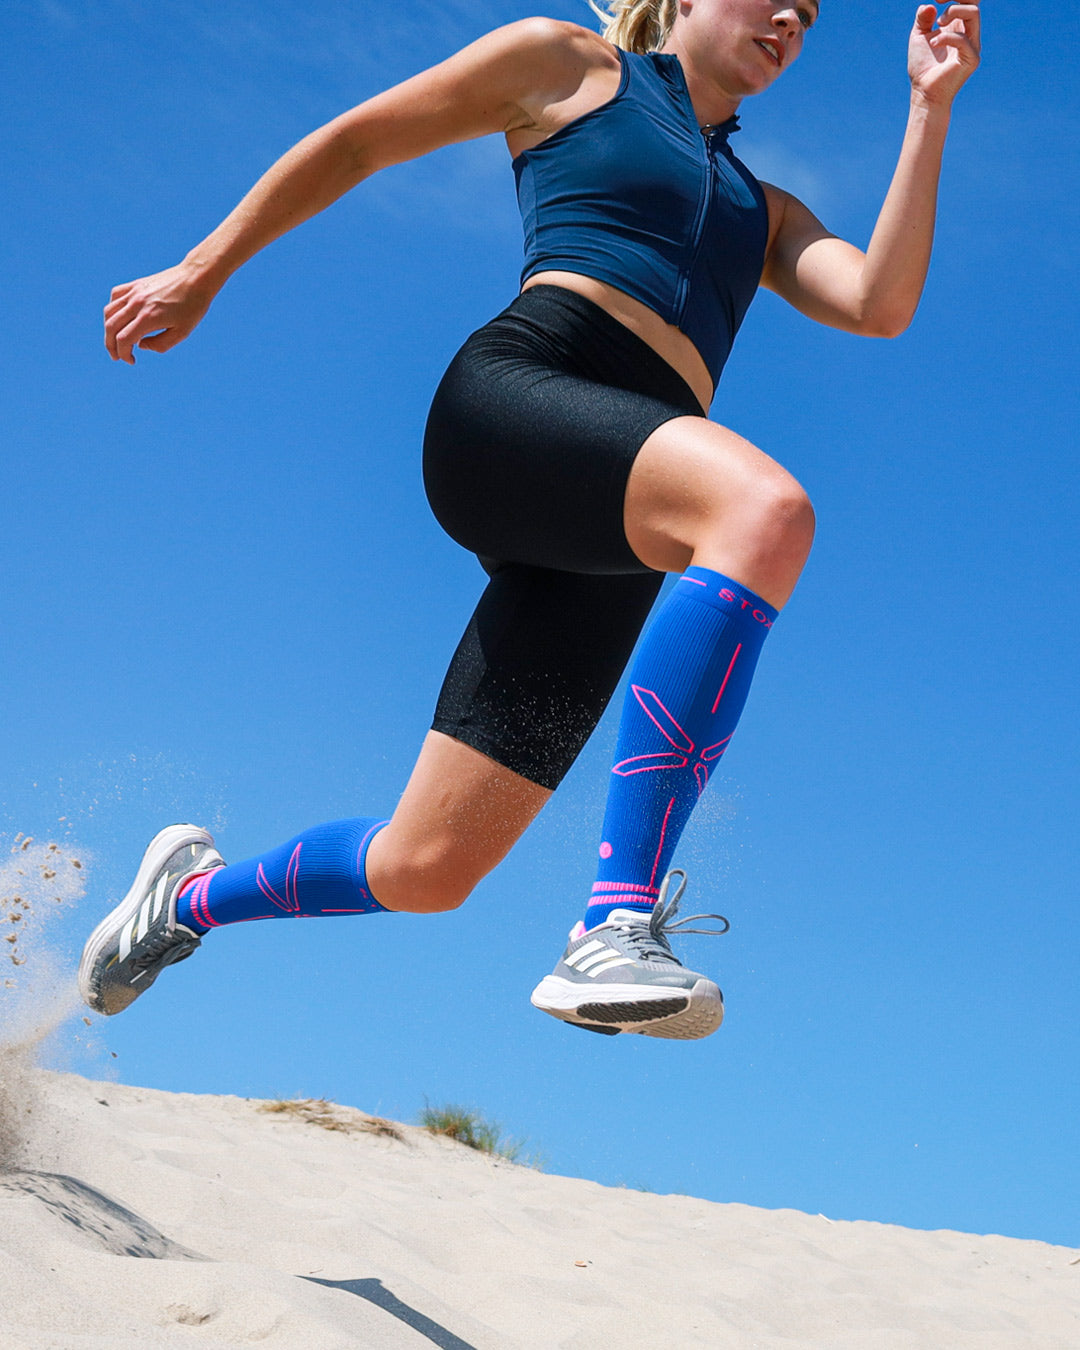 Woman running on sand with compressions socks.